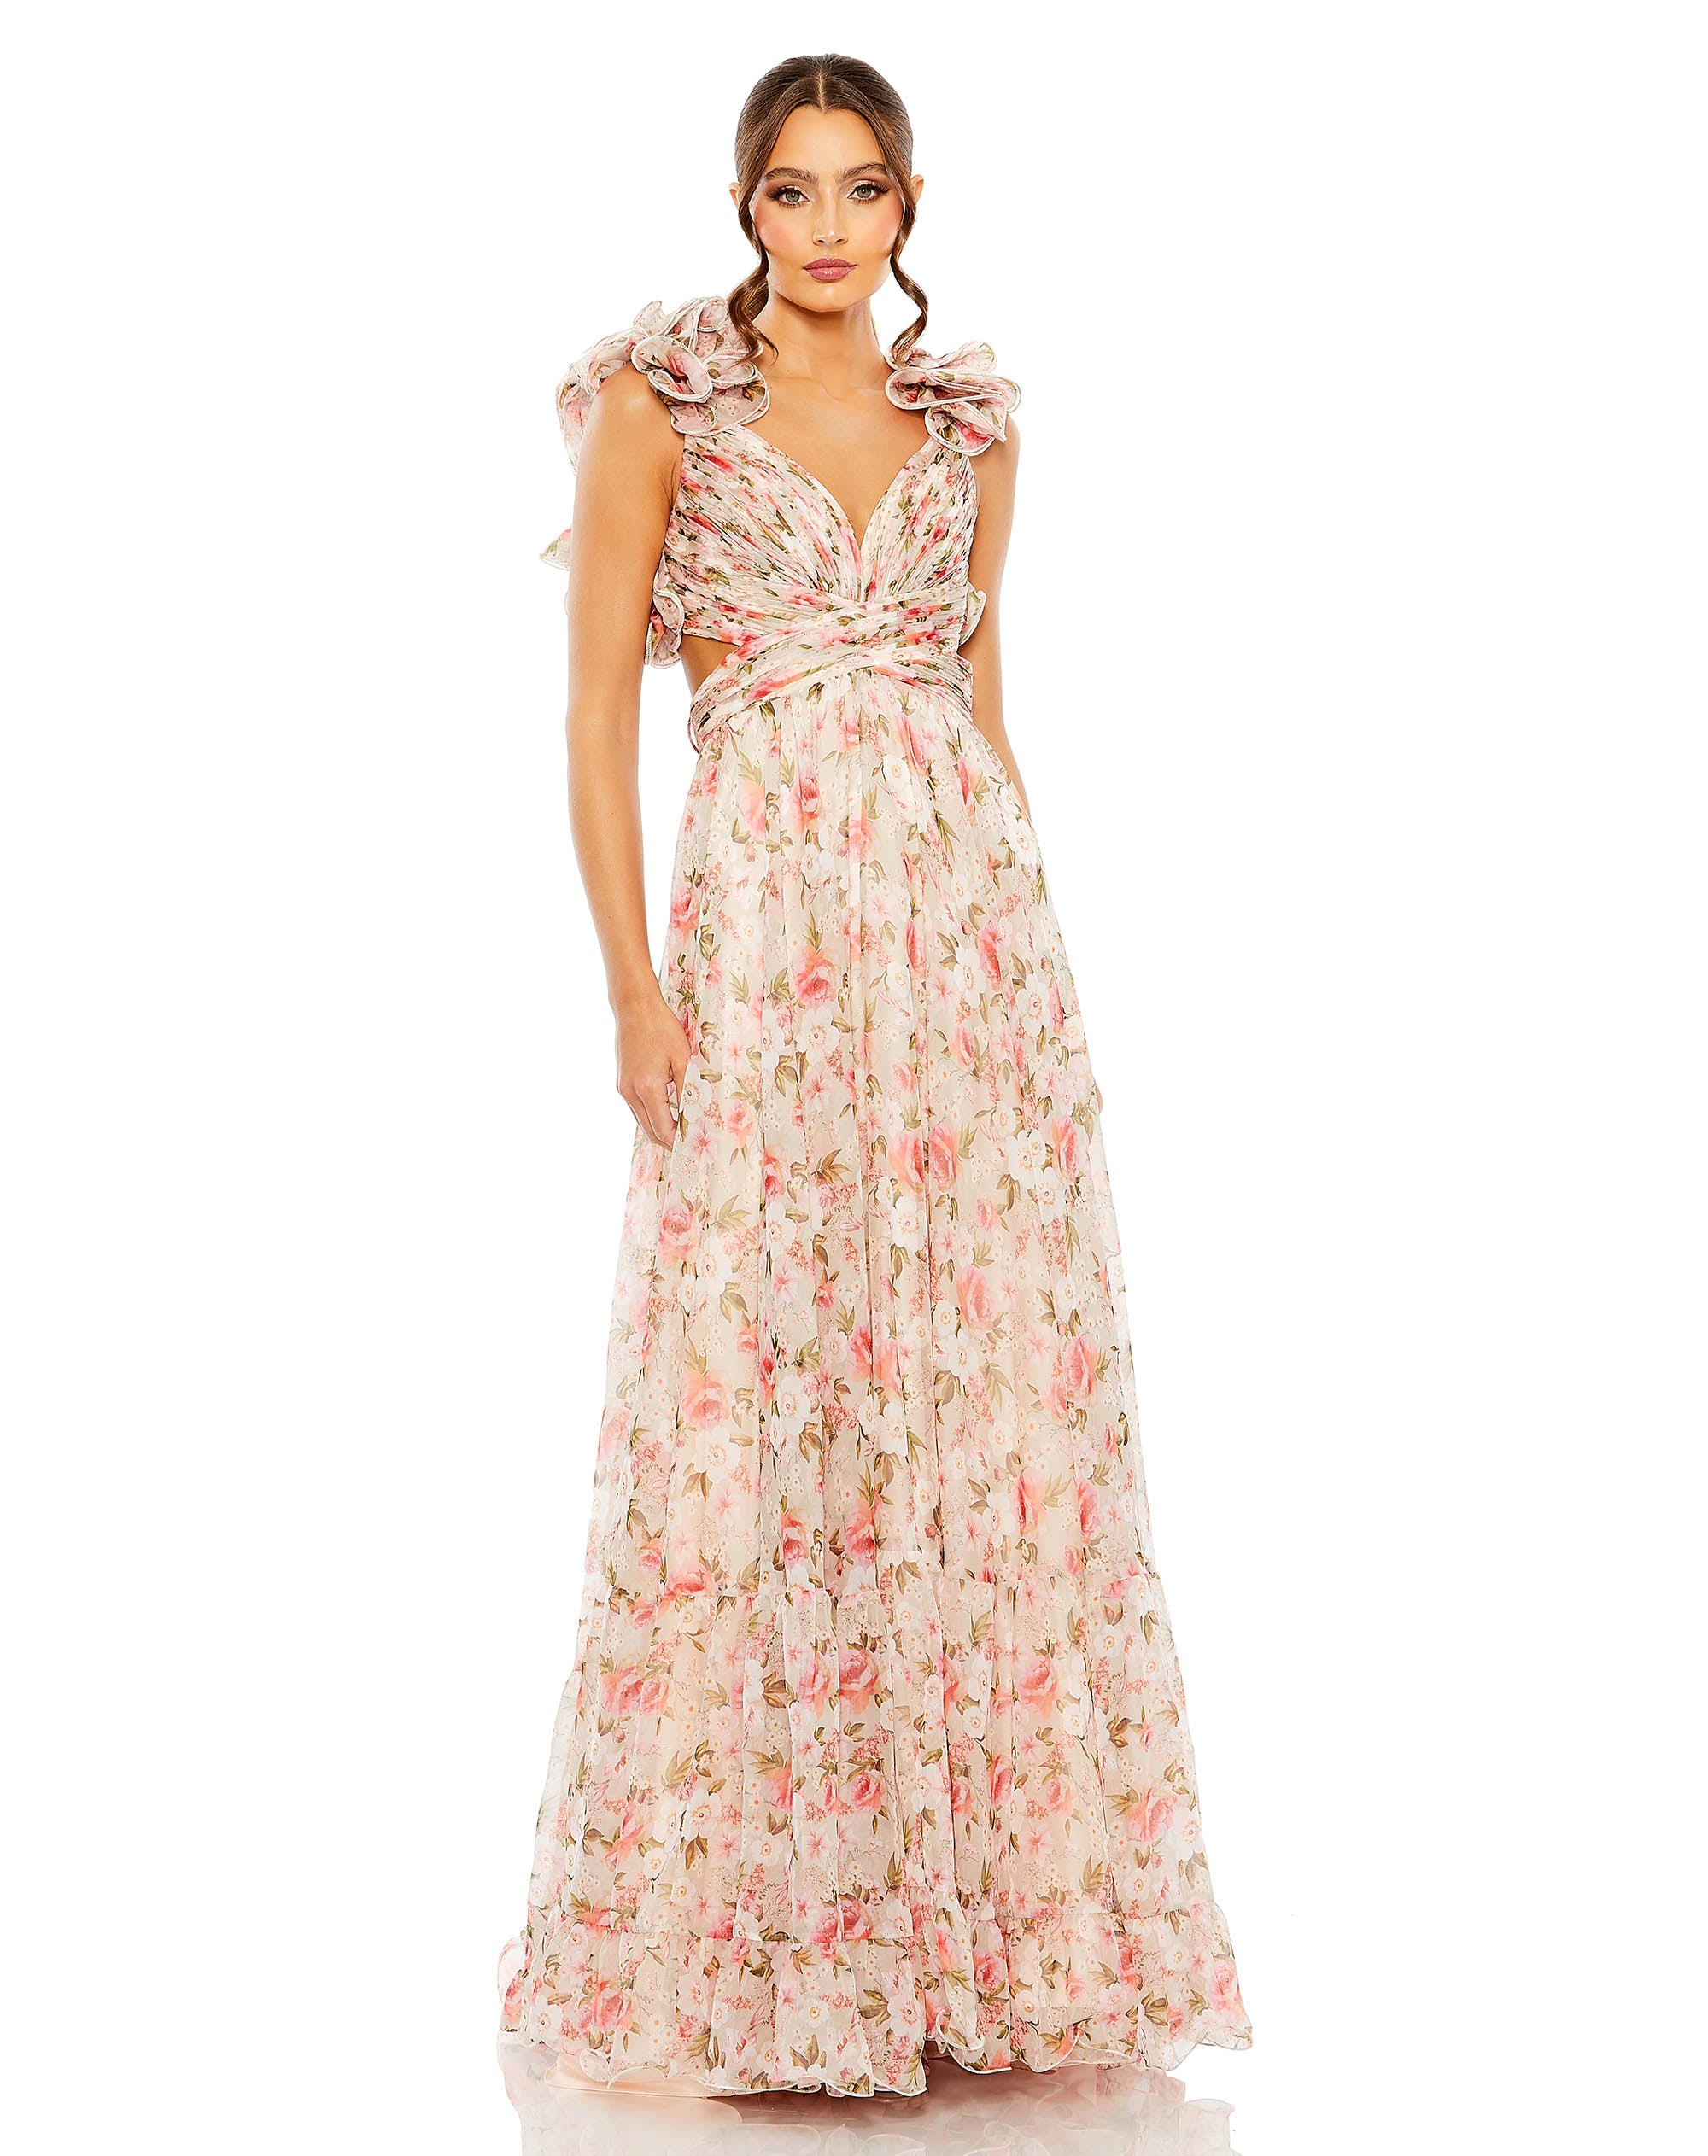 Ruffle Tiered Cut-Out Chiffon Floral Gown – Mac Duggal